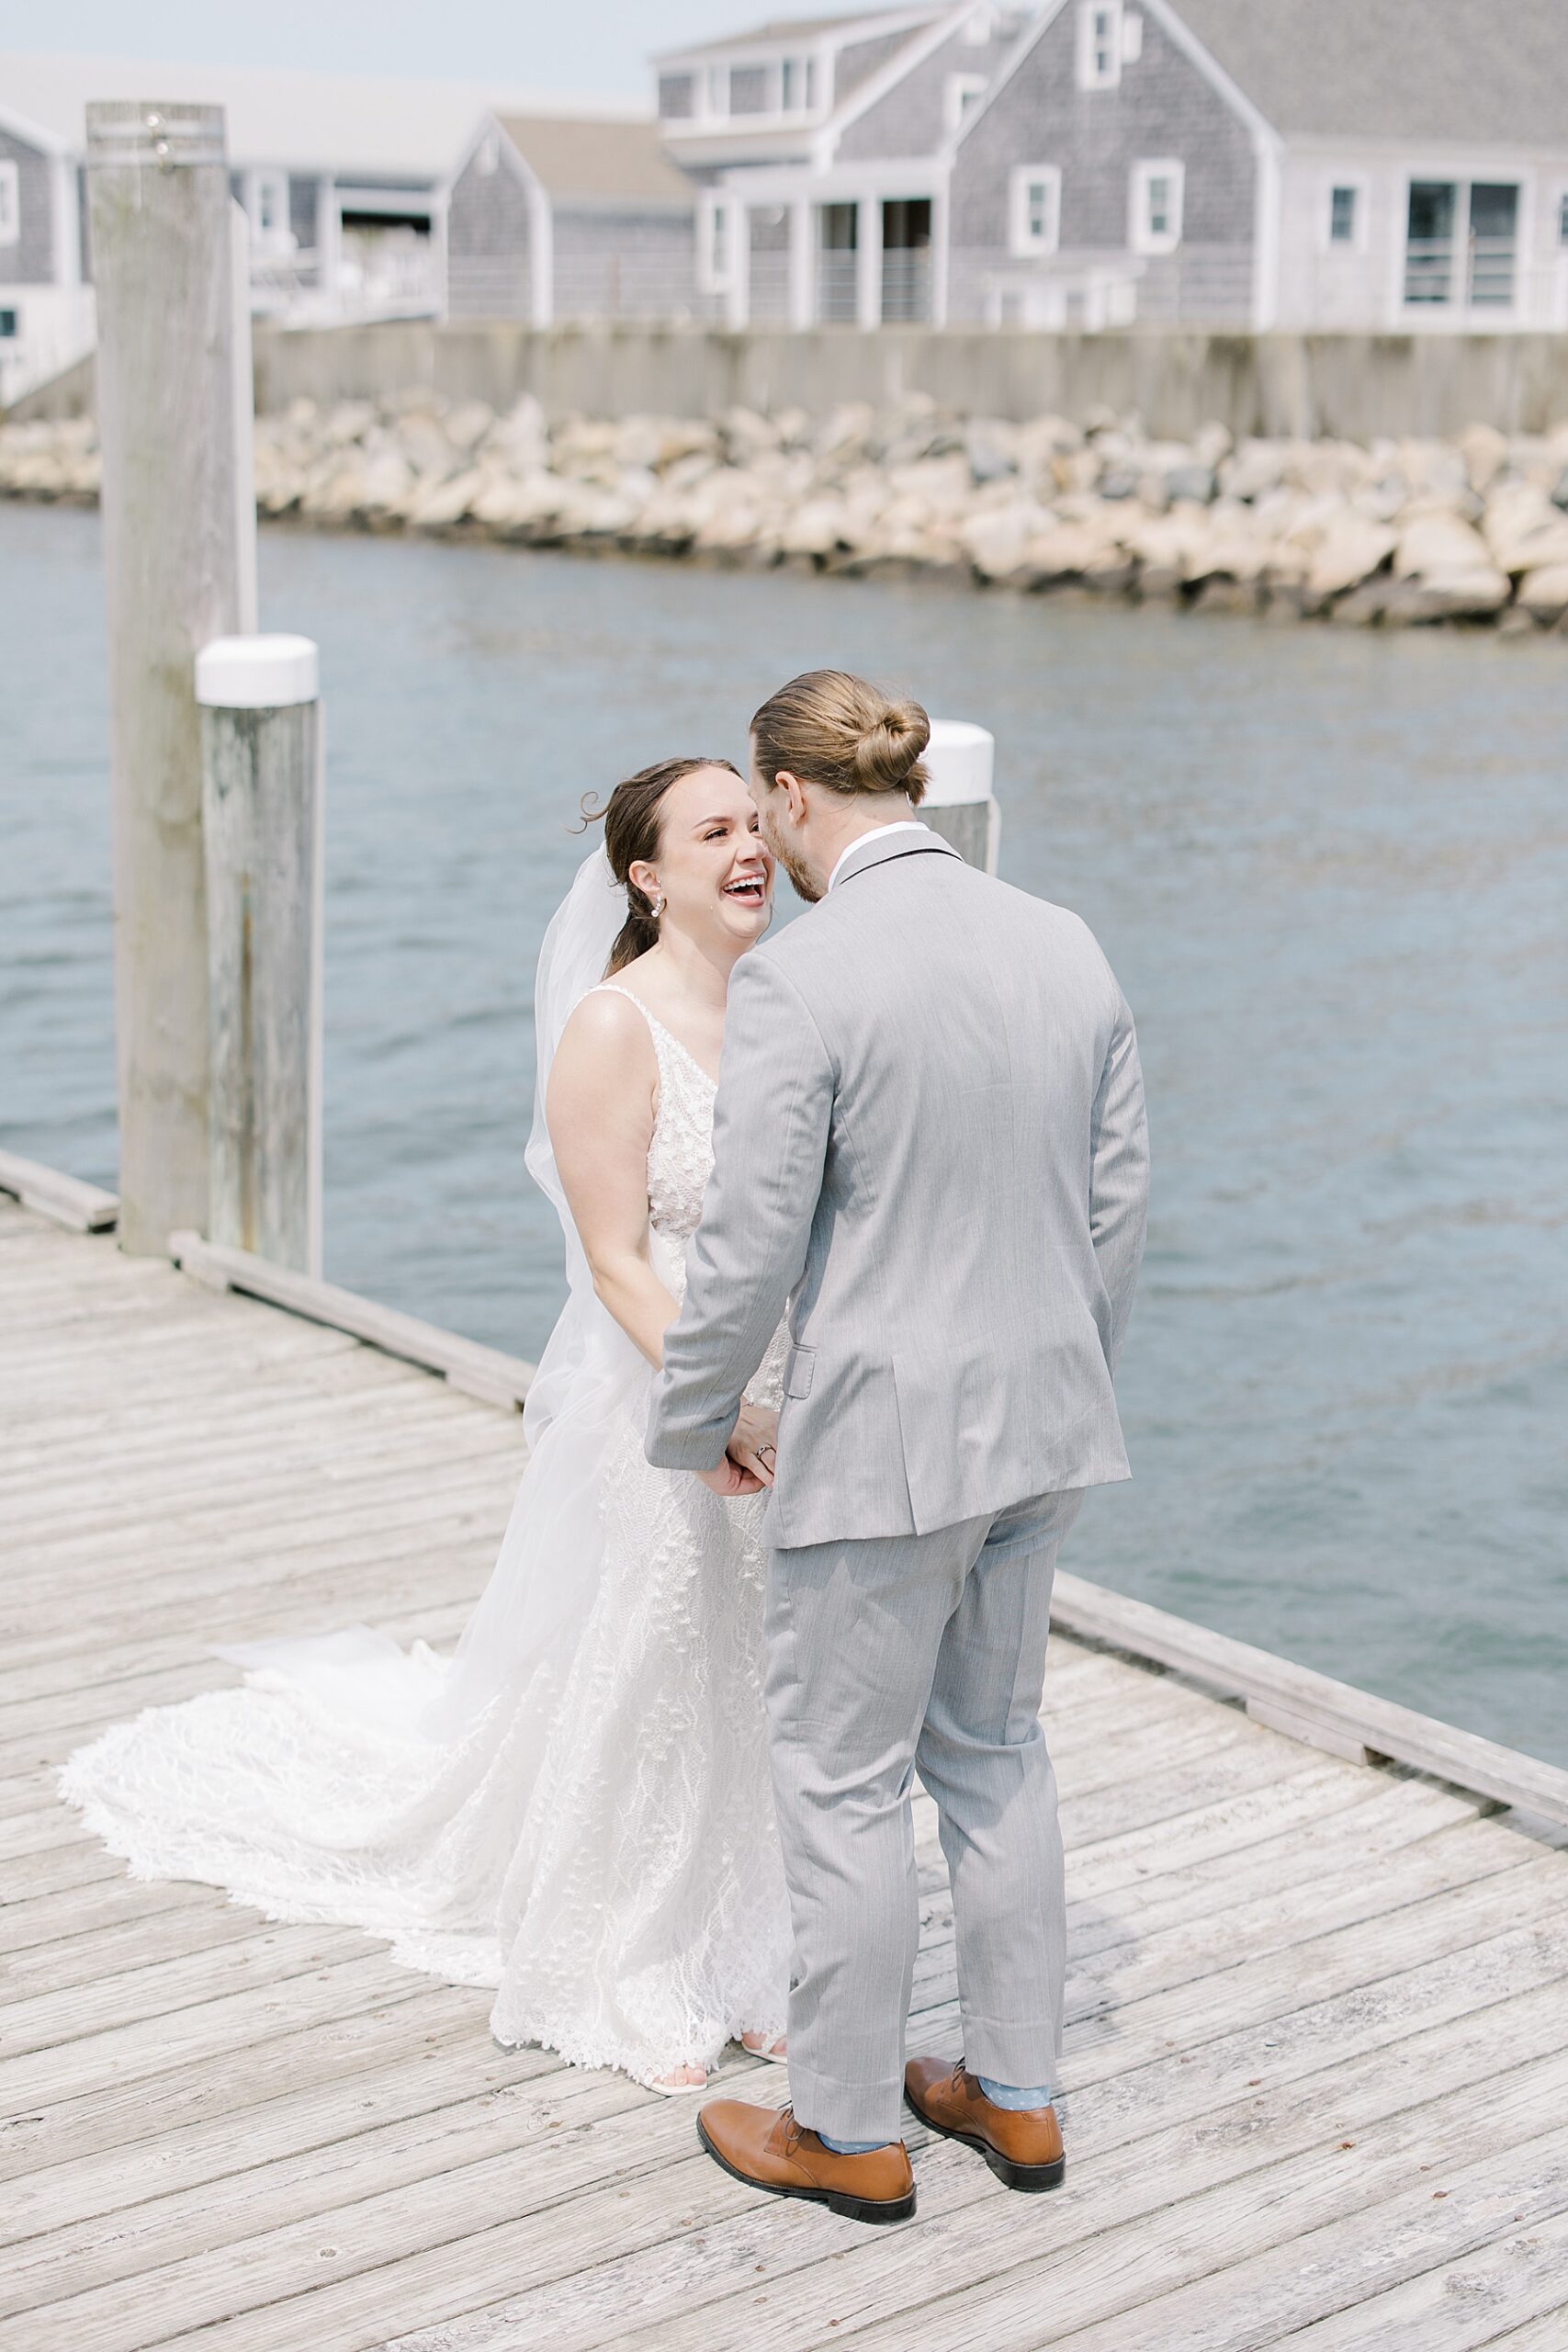 candid moment between bride and groom at Cape Cod Wedding